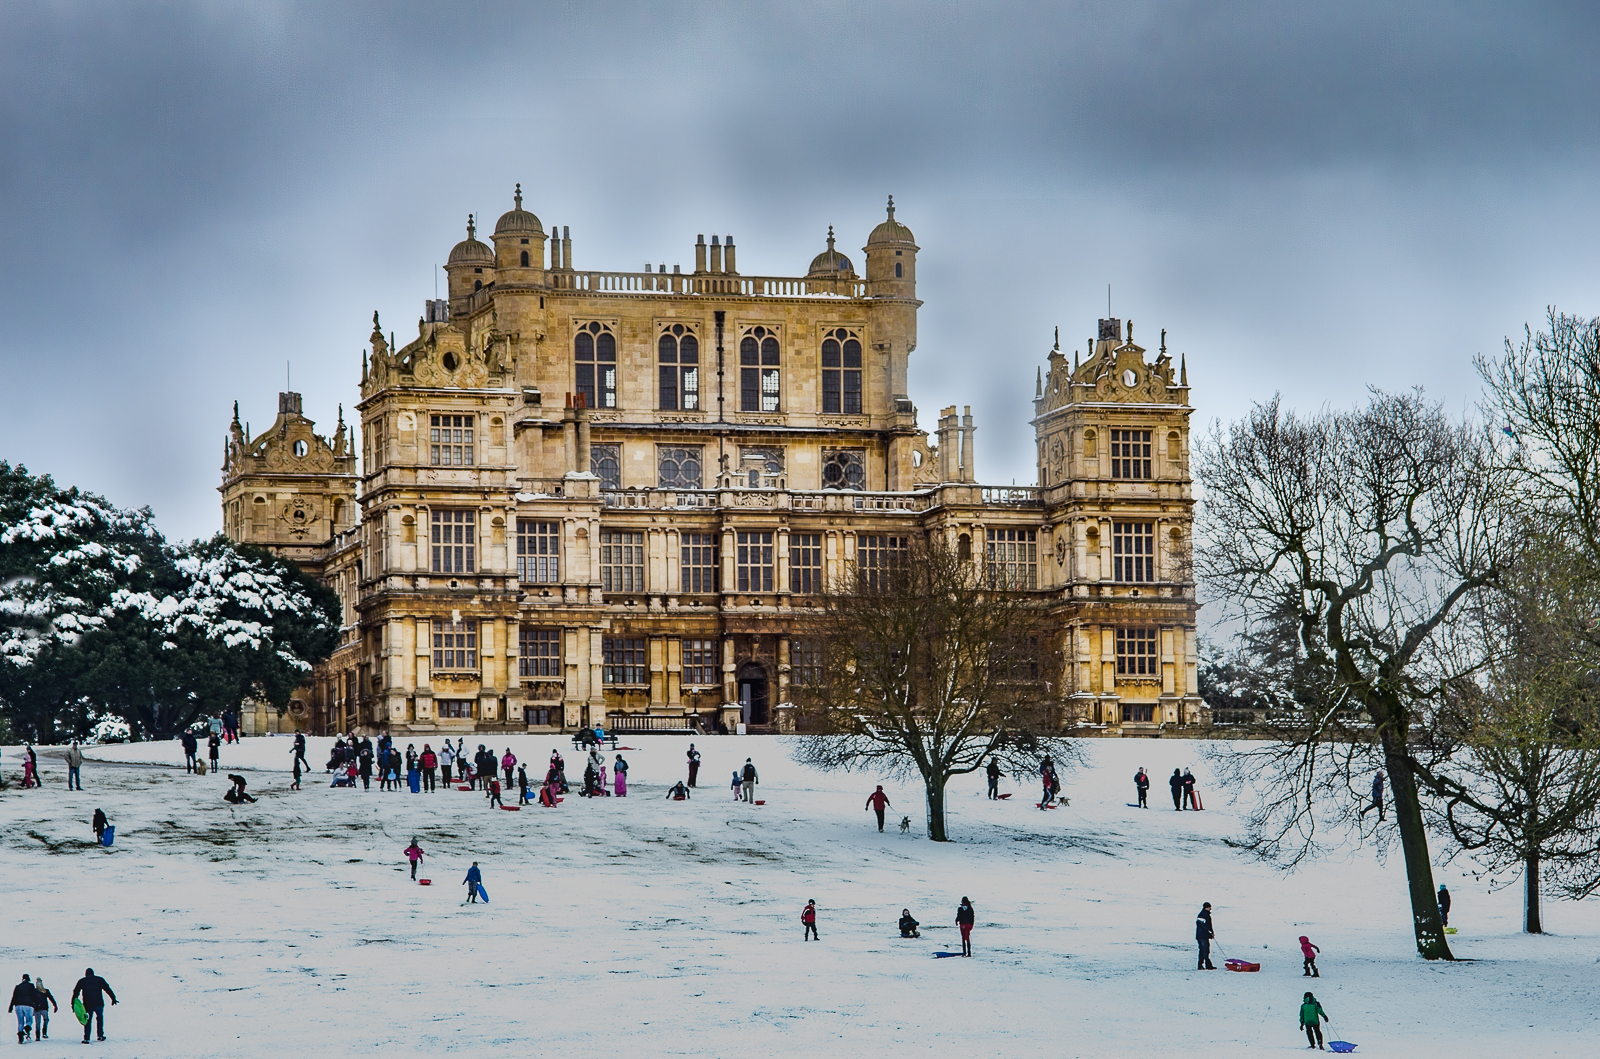 WINTRY WOLLATON by Ray Andrews